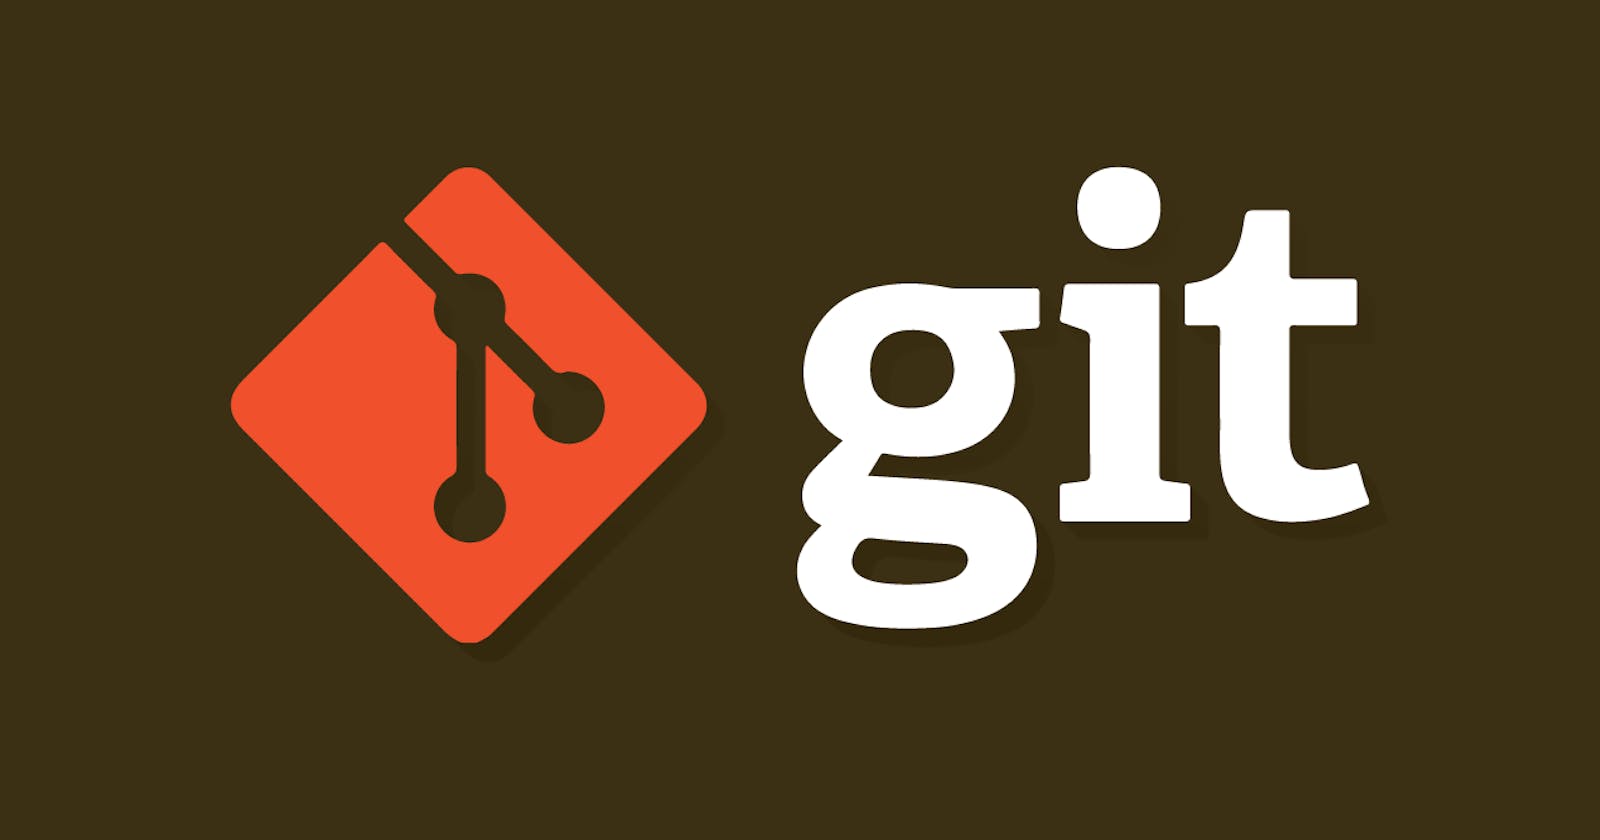 Git: The Essential Version Control System for Developers